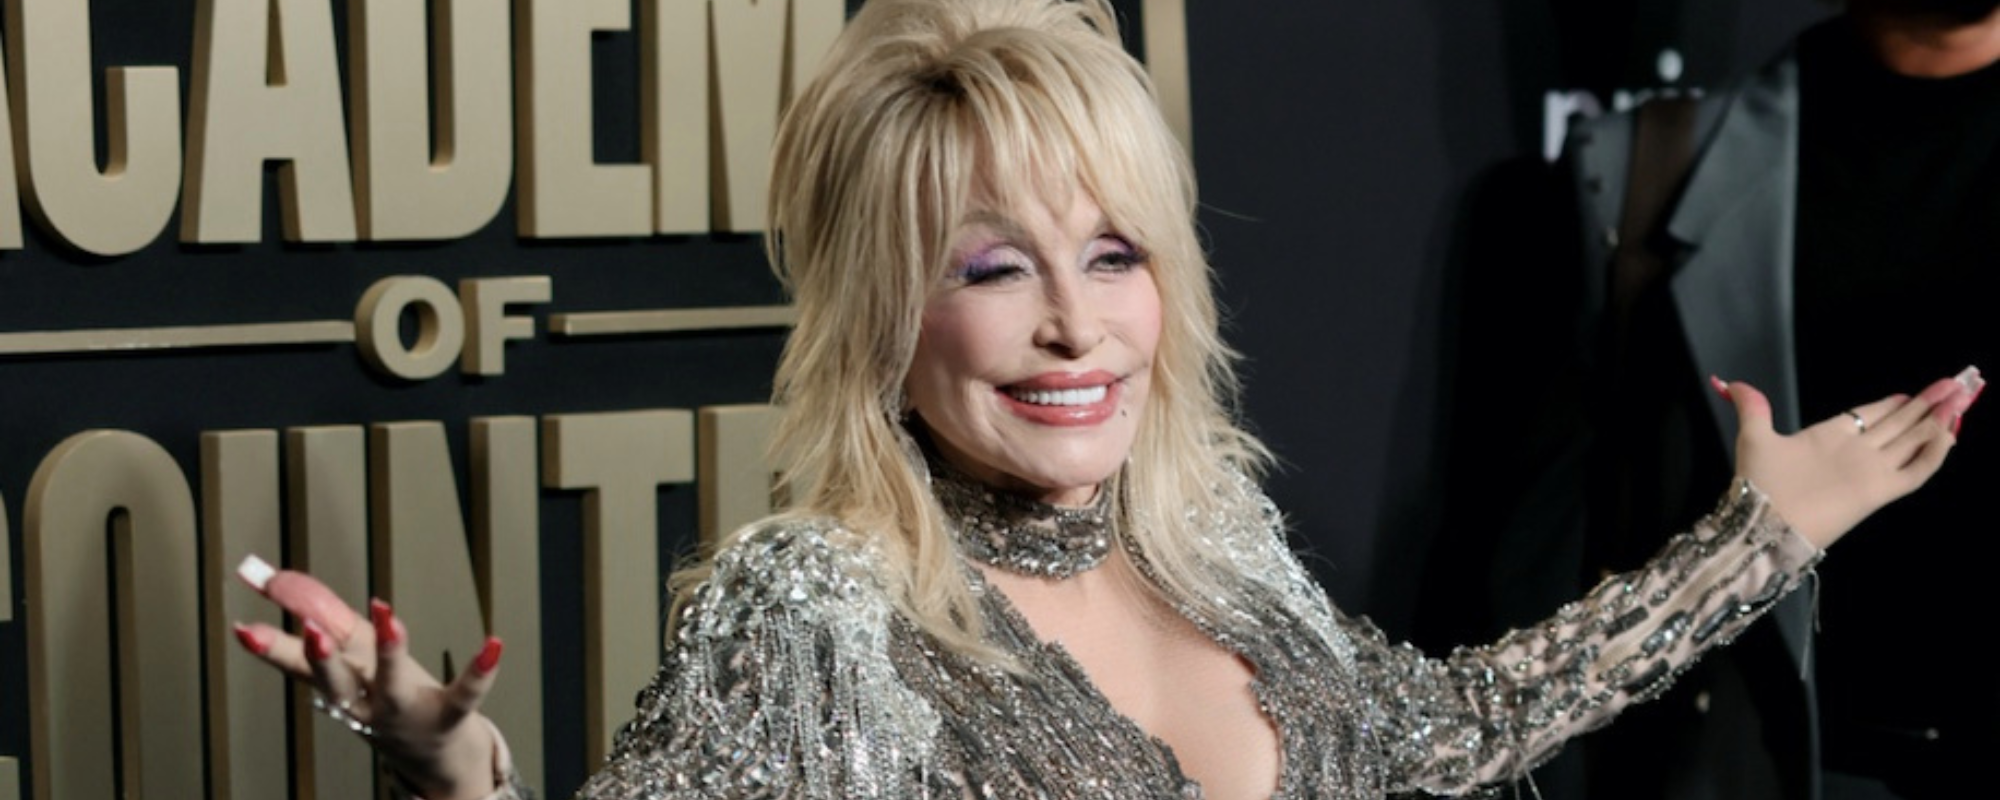 Dolly Parton Gets Her First Top-Five Album on the Billboard 200 Chart with ‘Rockstar’